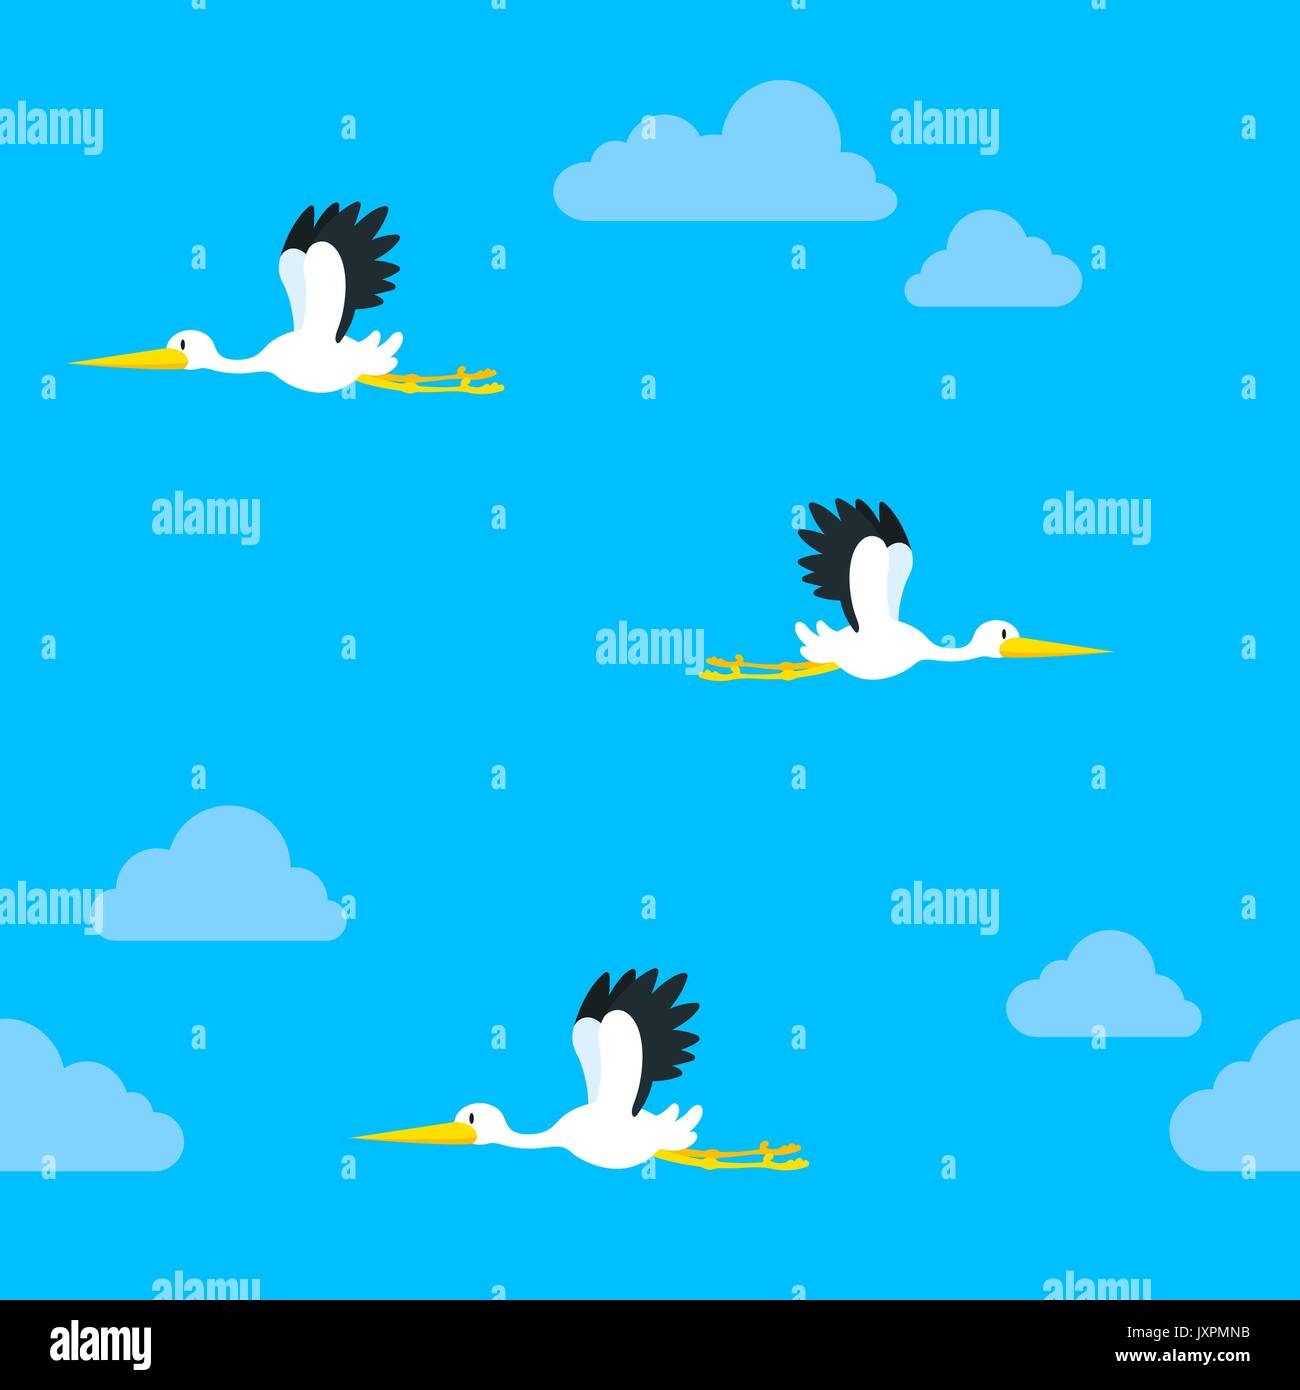 Seamless background pattern of flying storks on a blue sky with clouds heading in opposite directions, vector design in square format Stock Vector